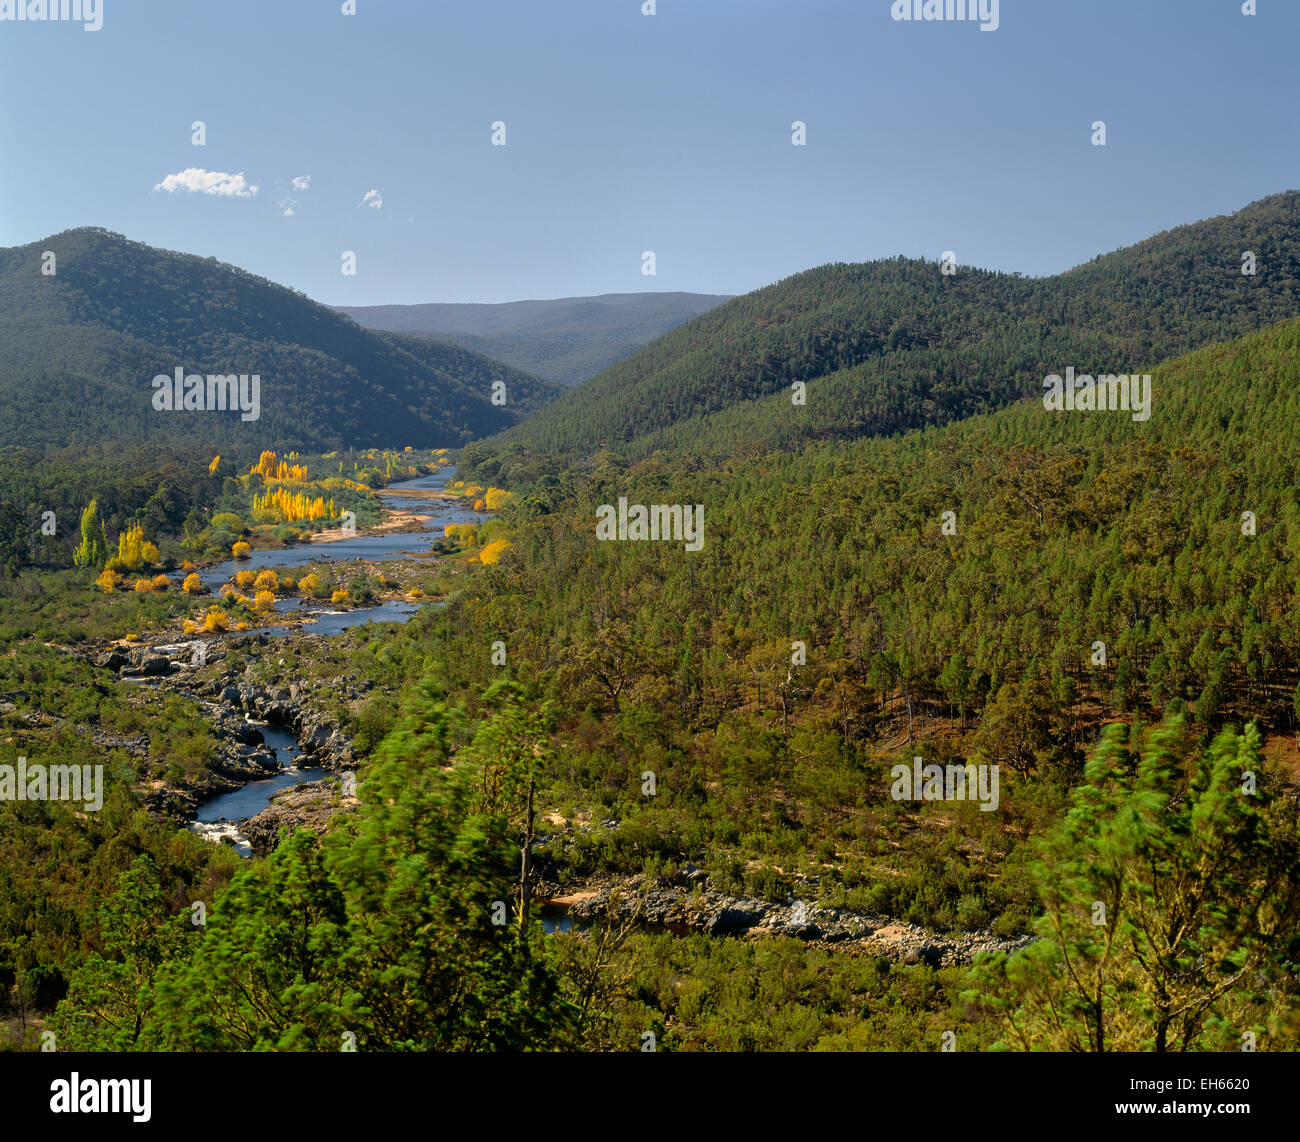 Australia: Snowy River winds through a valley in the Snowy Mountains of New South Wales Stock Photo